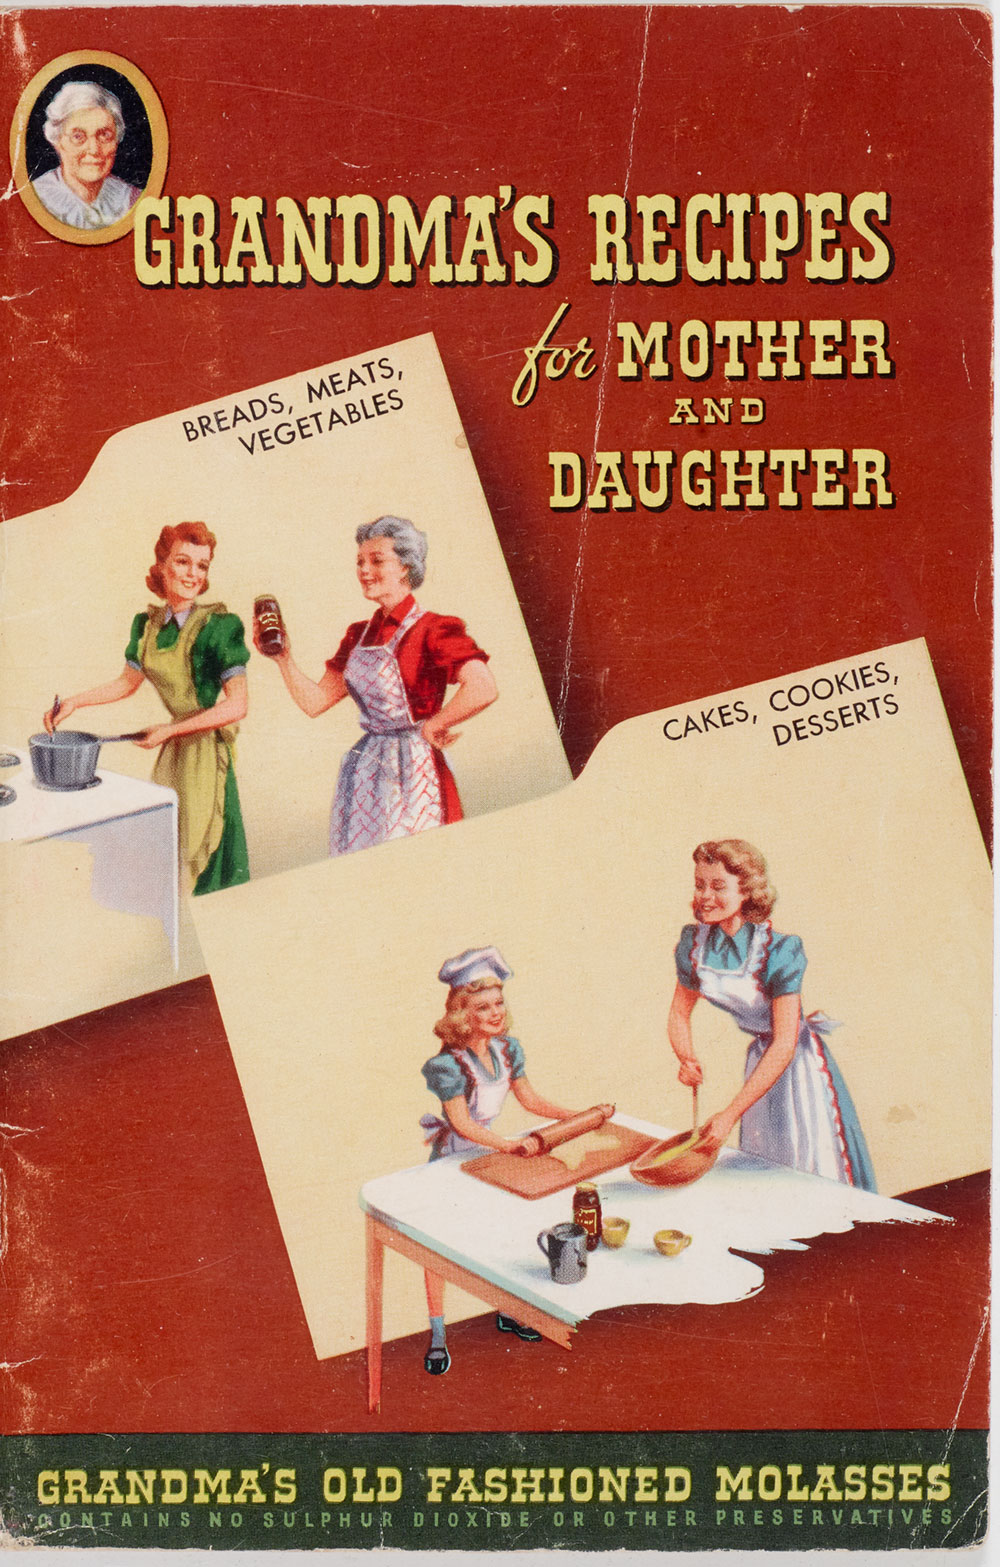 Book cover for "Grandma's Recipes for Mother and Daughter"